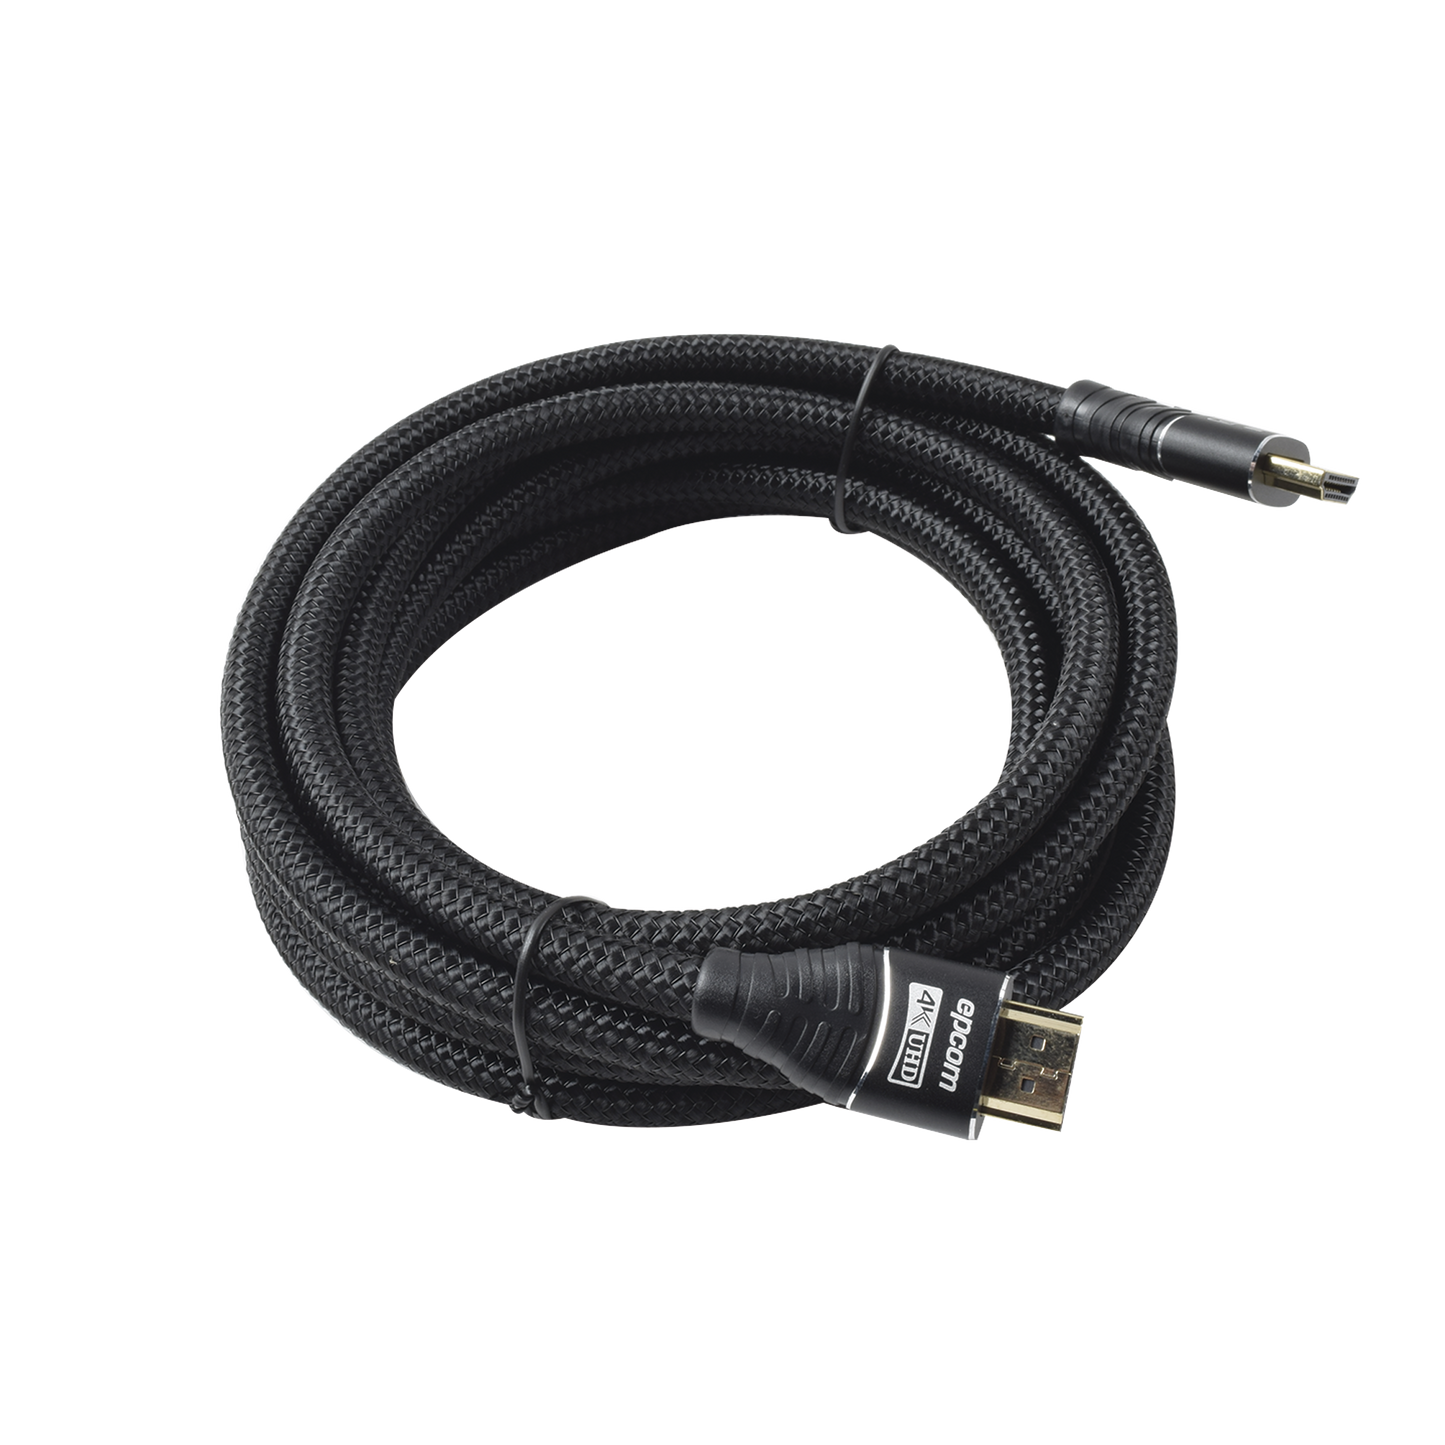 HDMI Round Cable 3m ( 9.8 ft ) Version 2.0  4K ULTRA HD Optimized Resolution